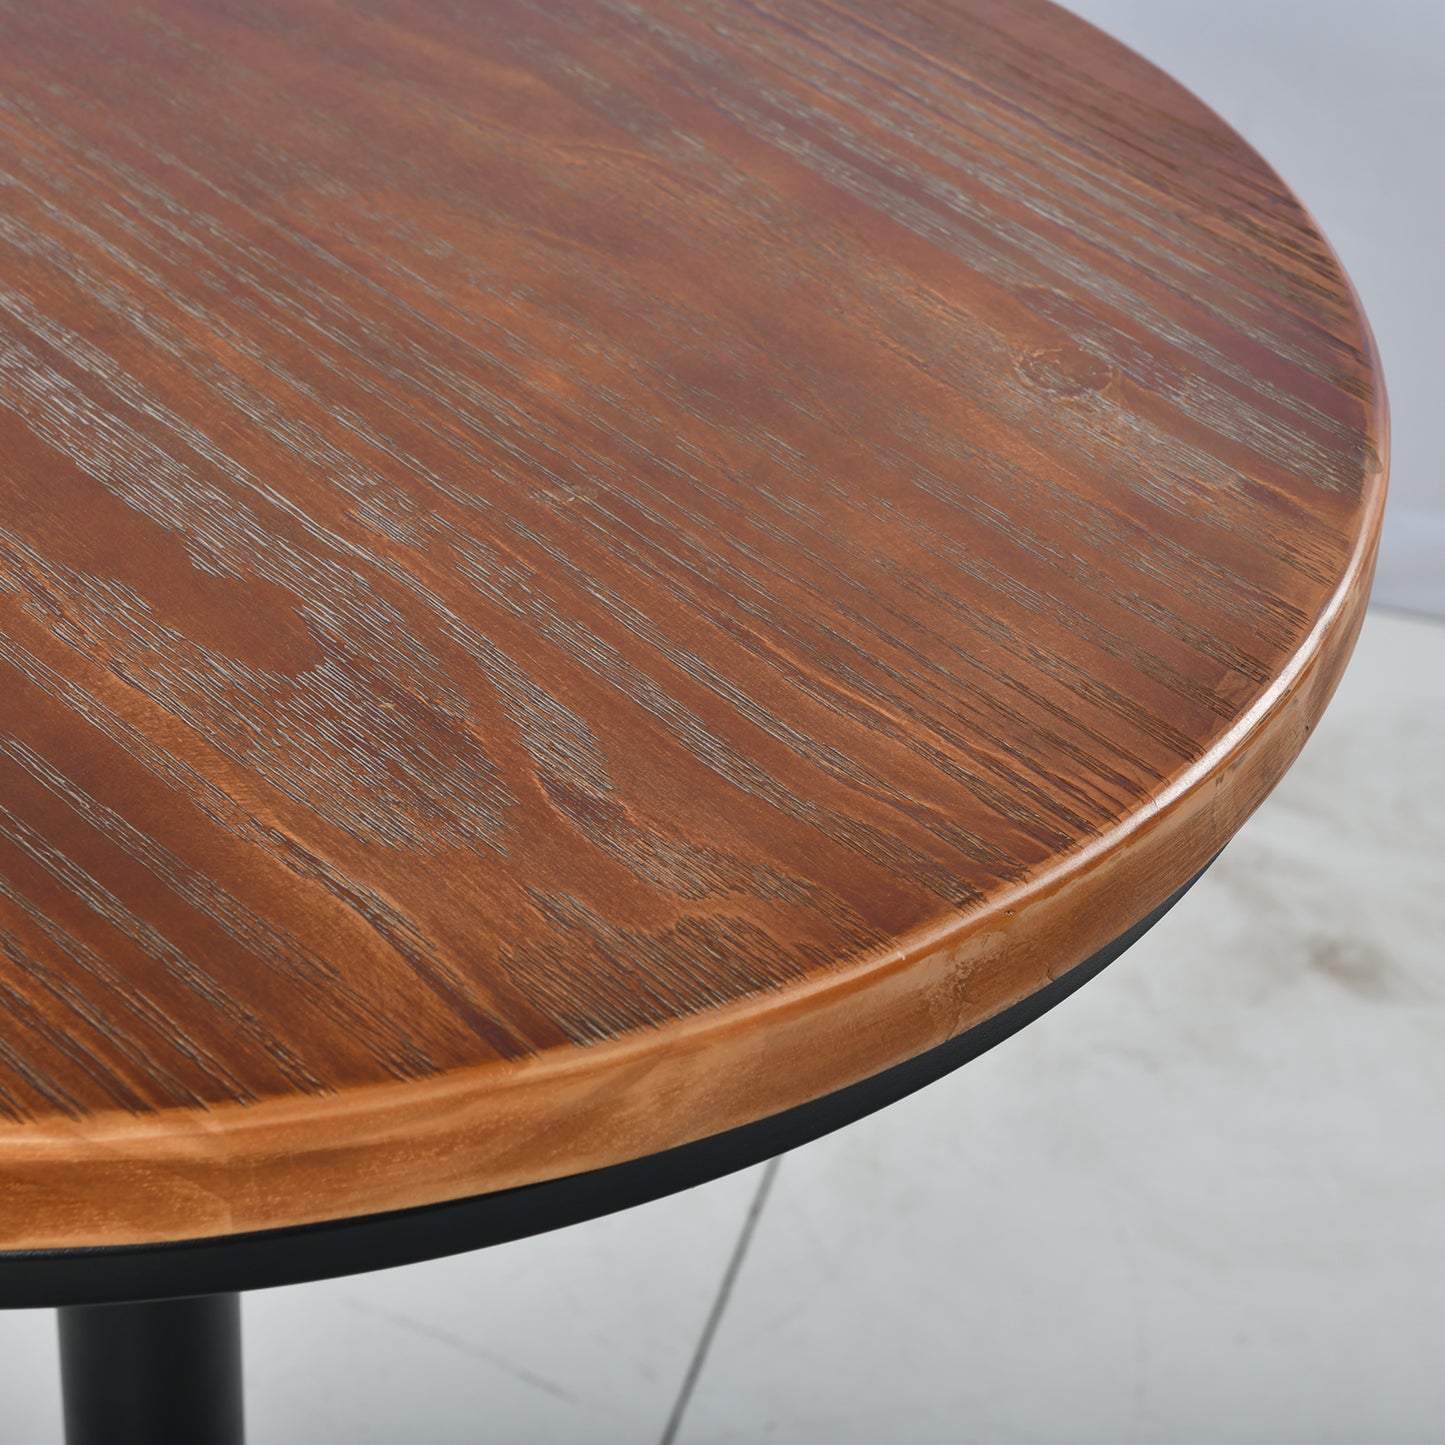 23.62”dia brown bar table top Round plank